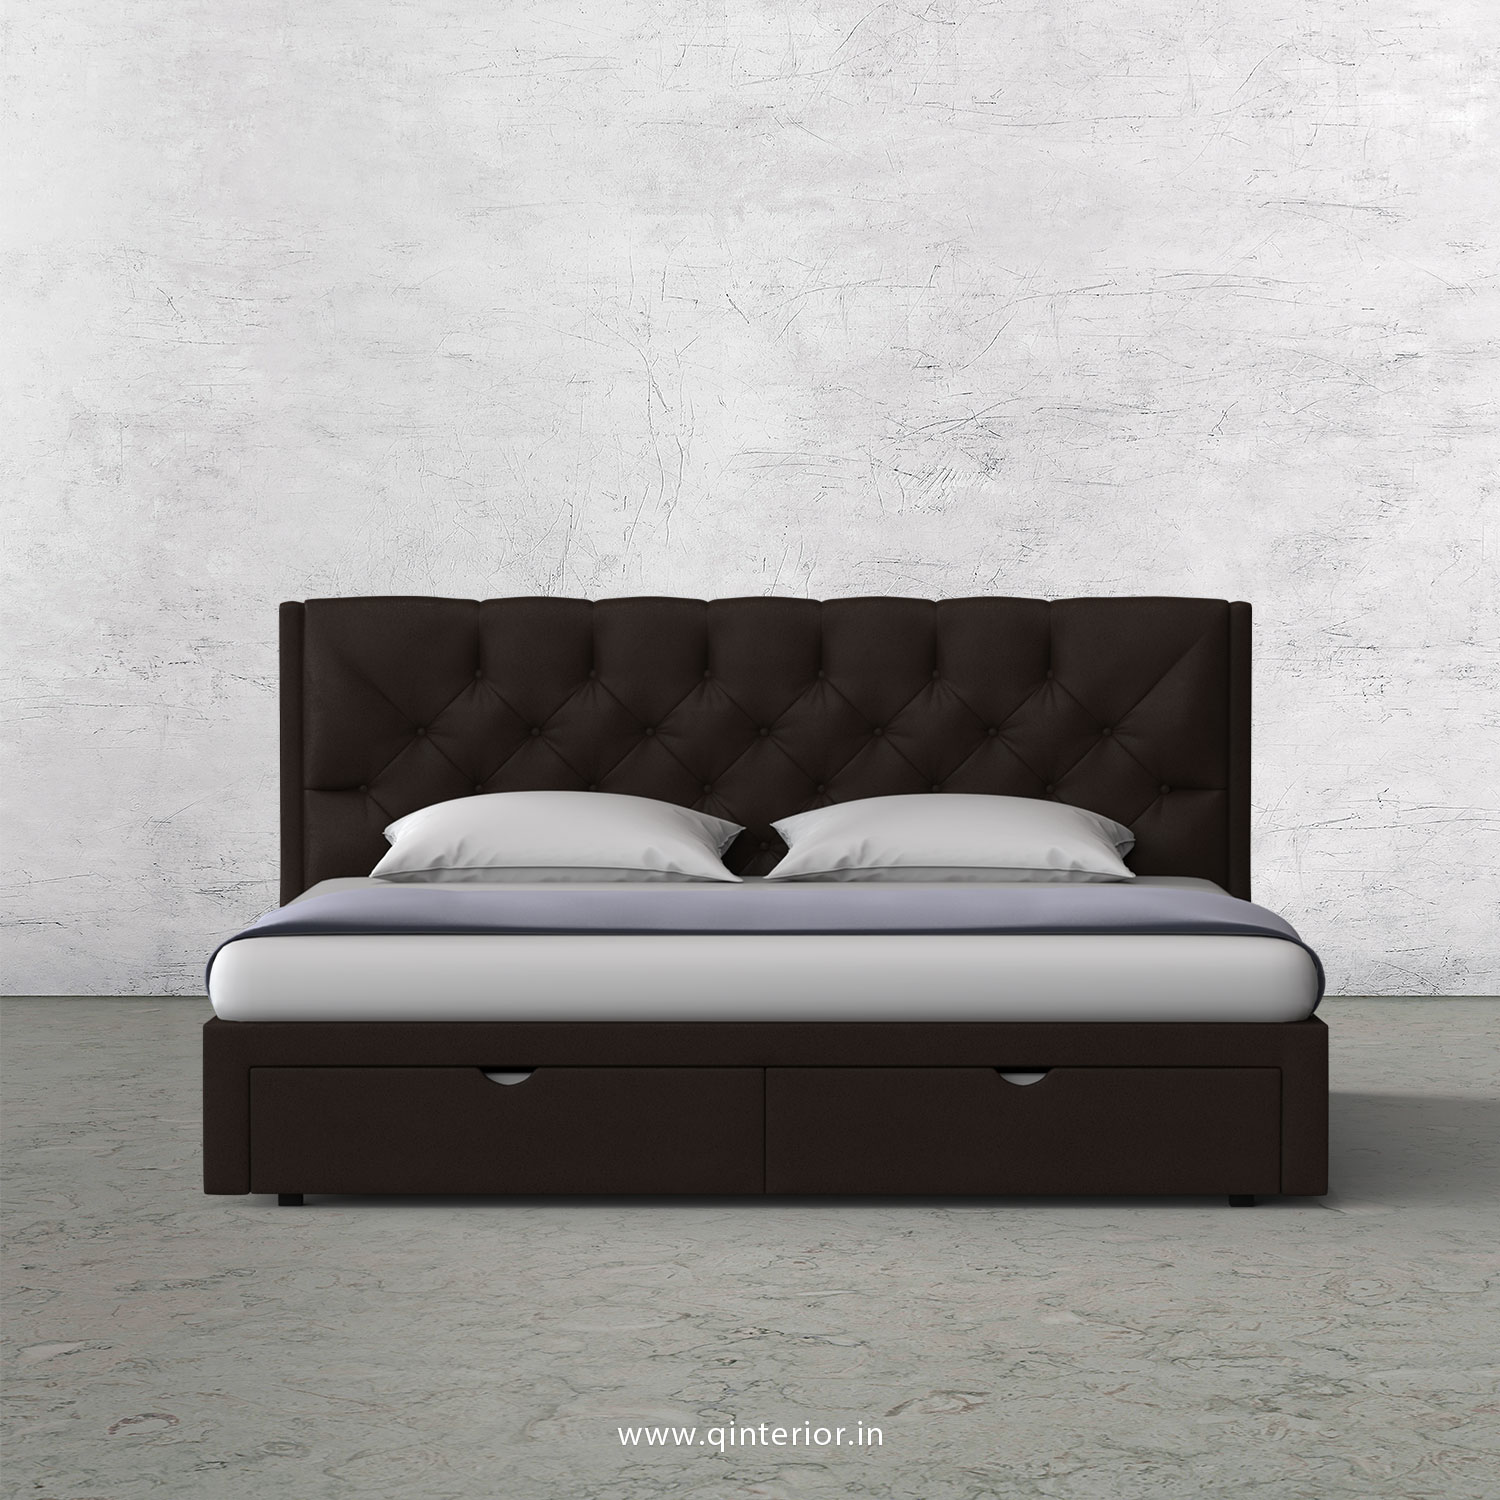 Scorpius Queen Storage Bed in Fab Leather Fabric - QBD001 FL16